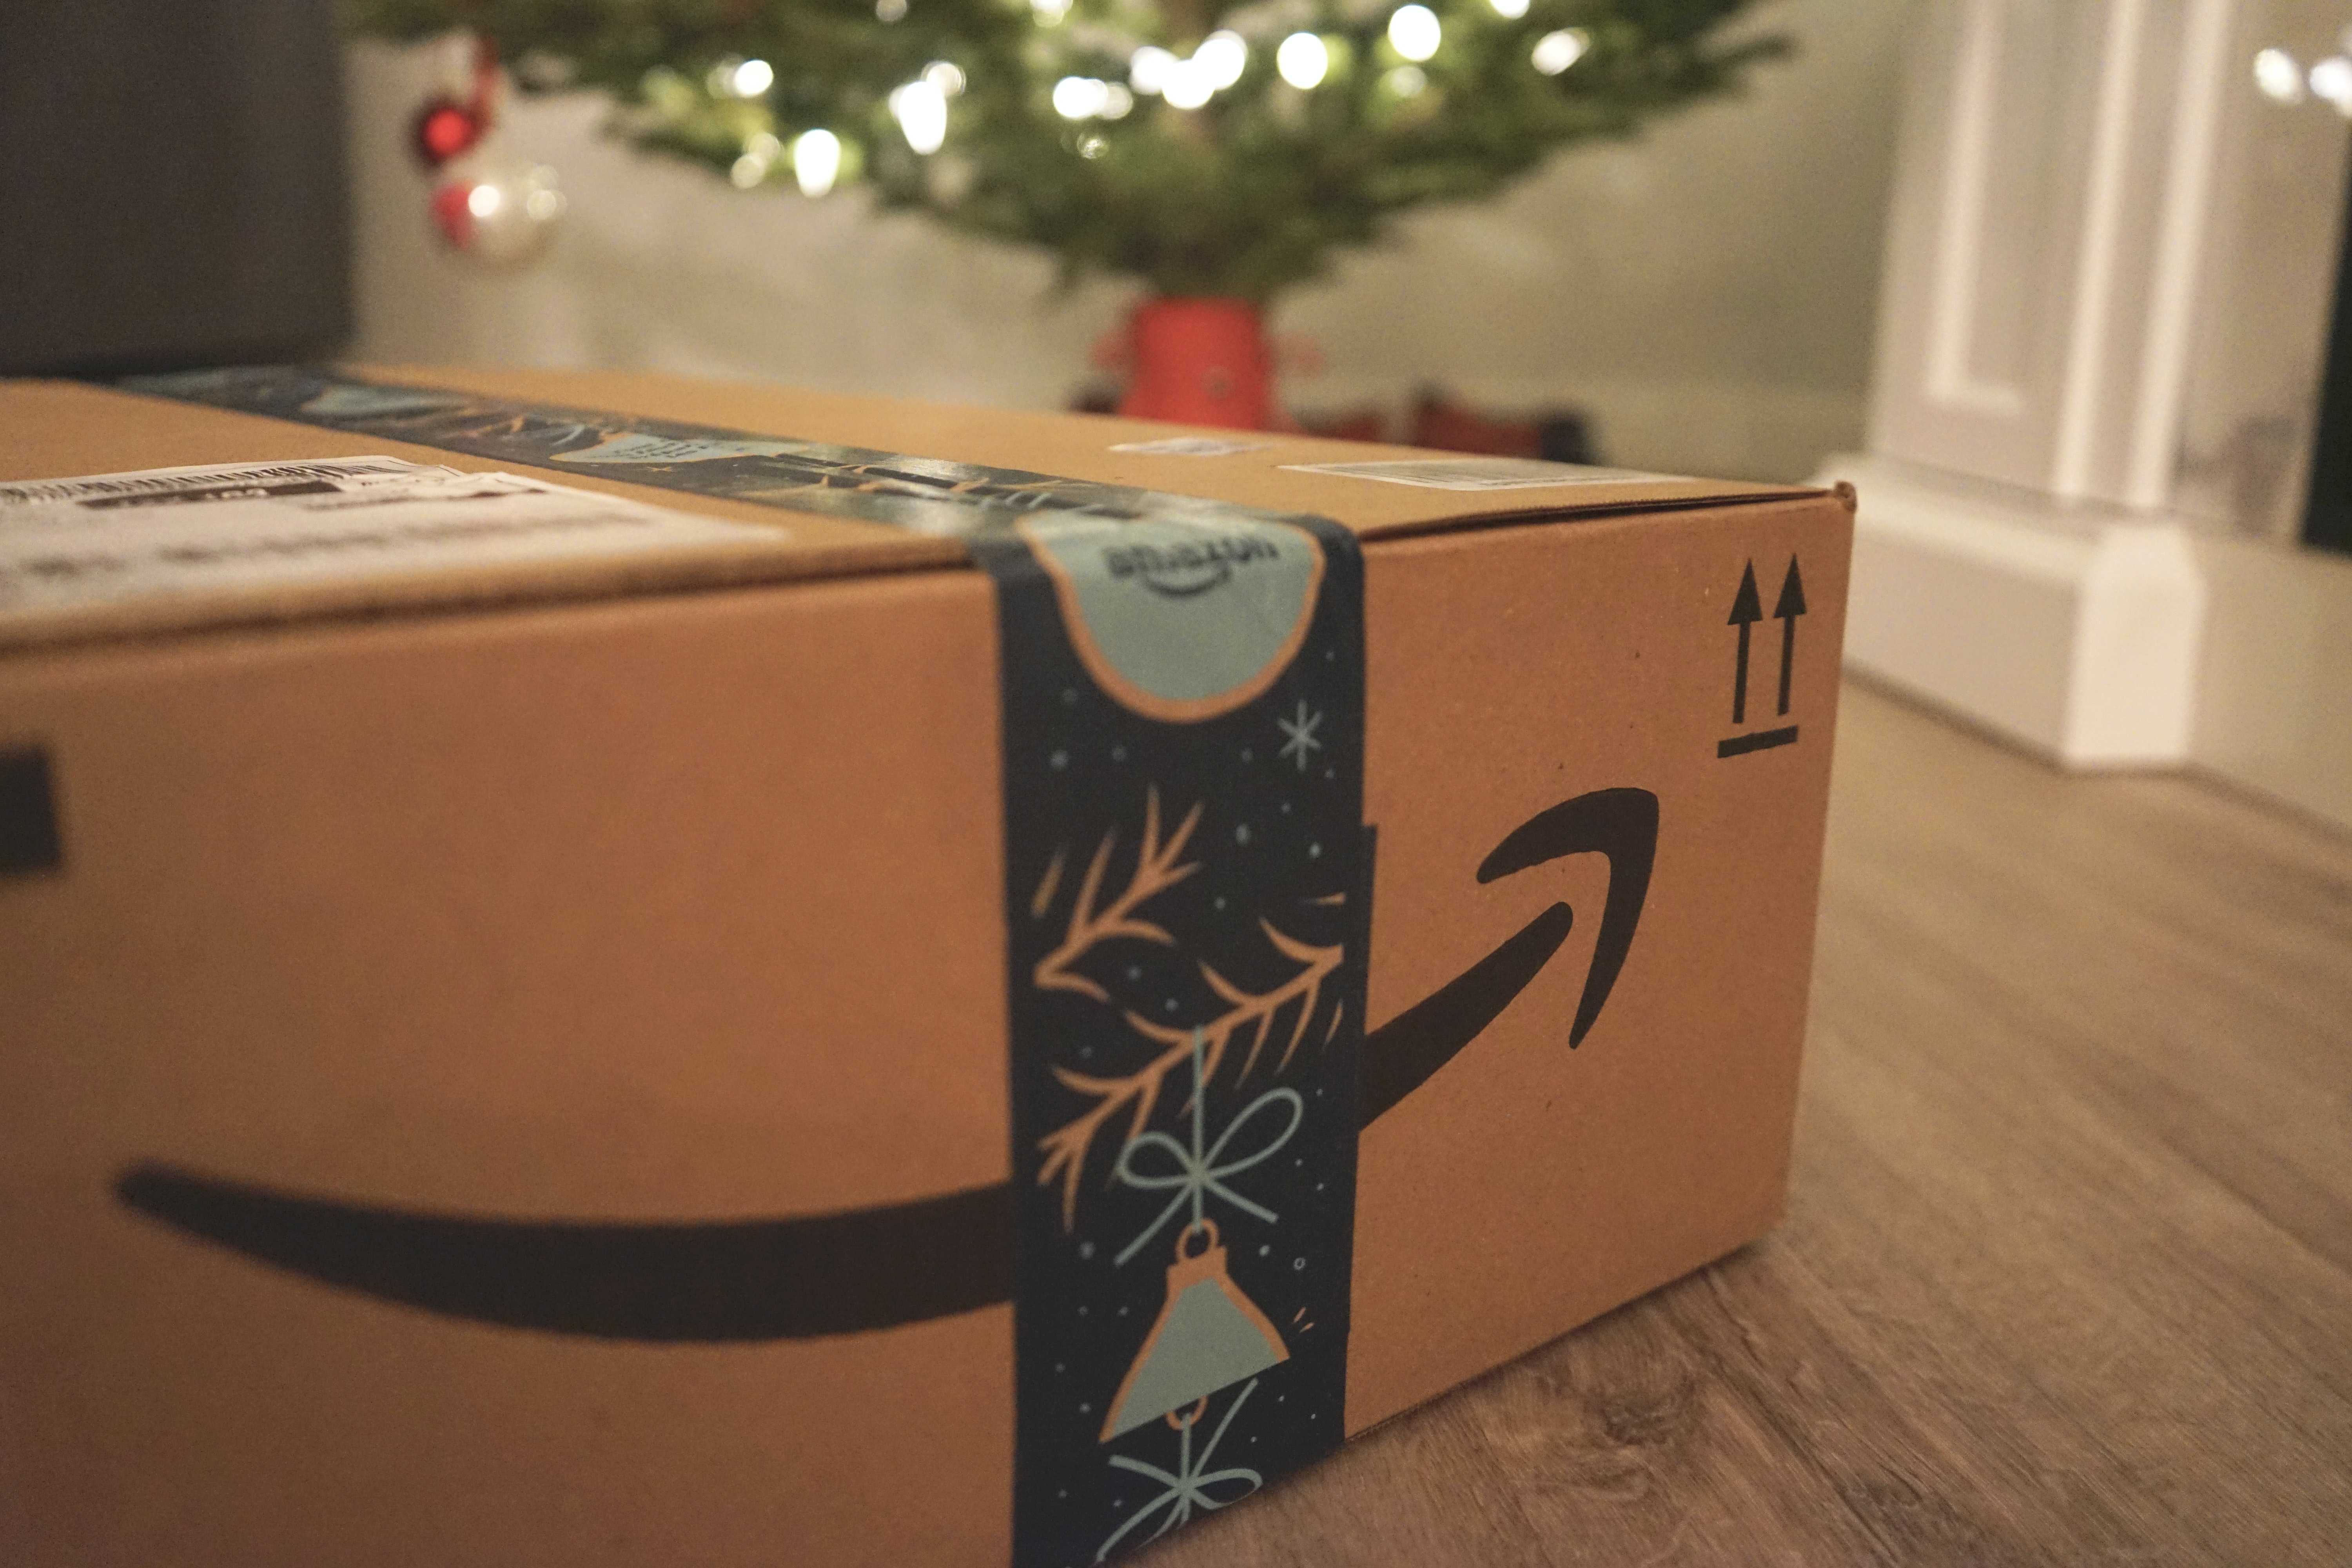 A box displaying the amazon logo on its side